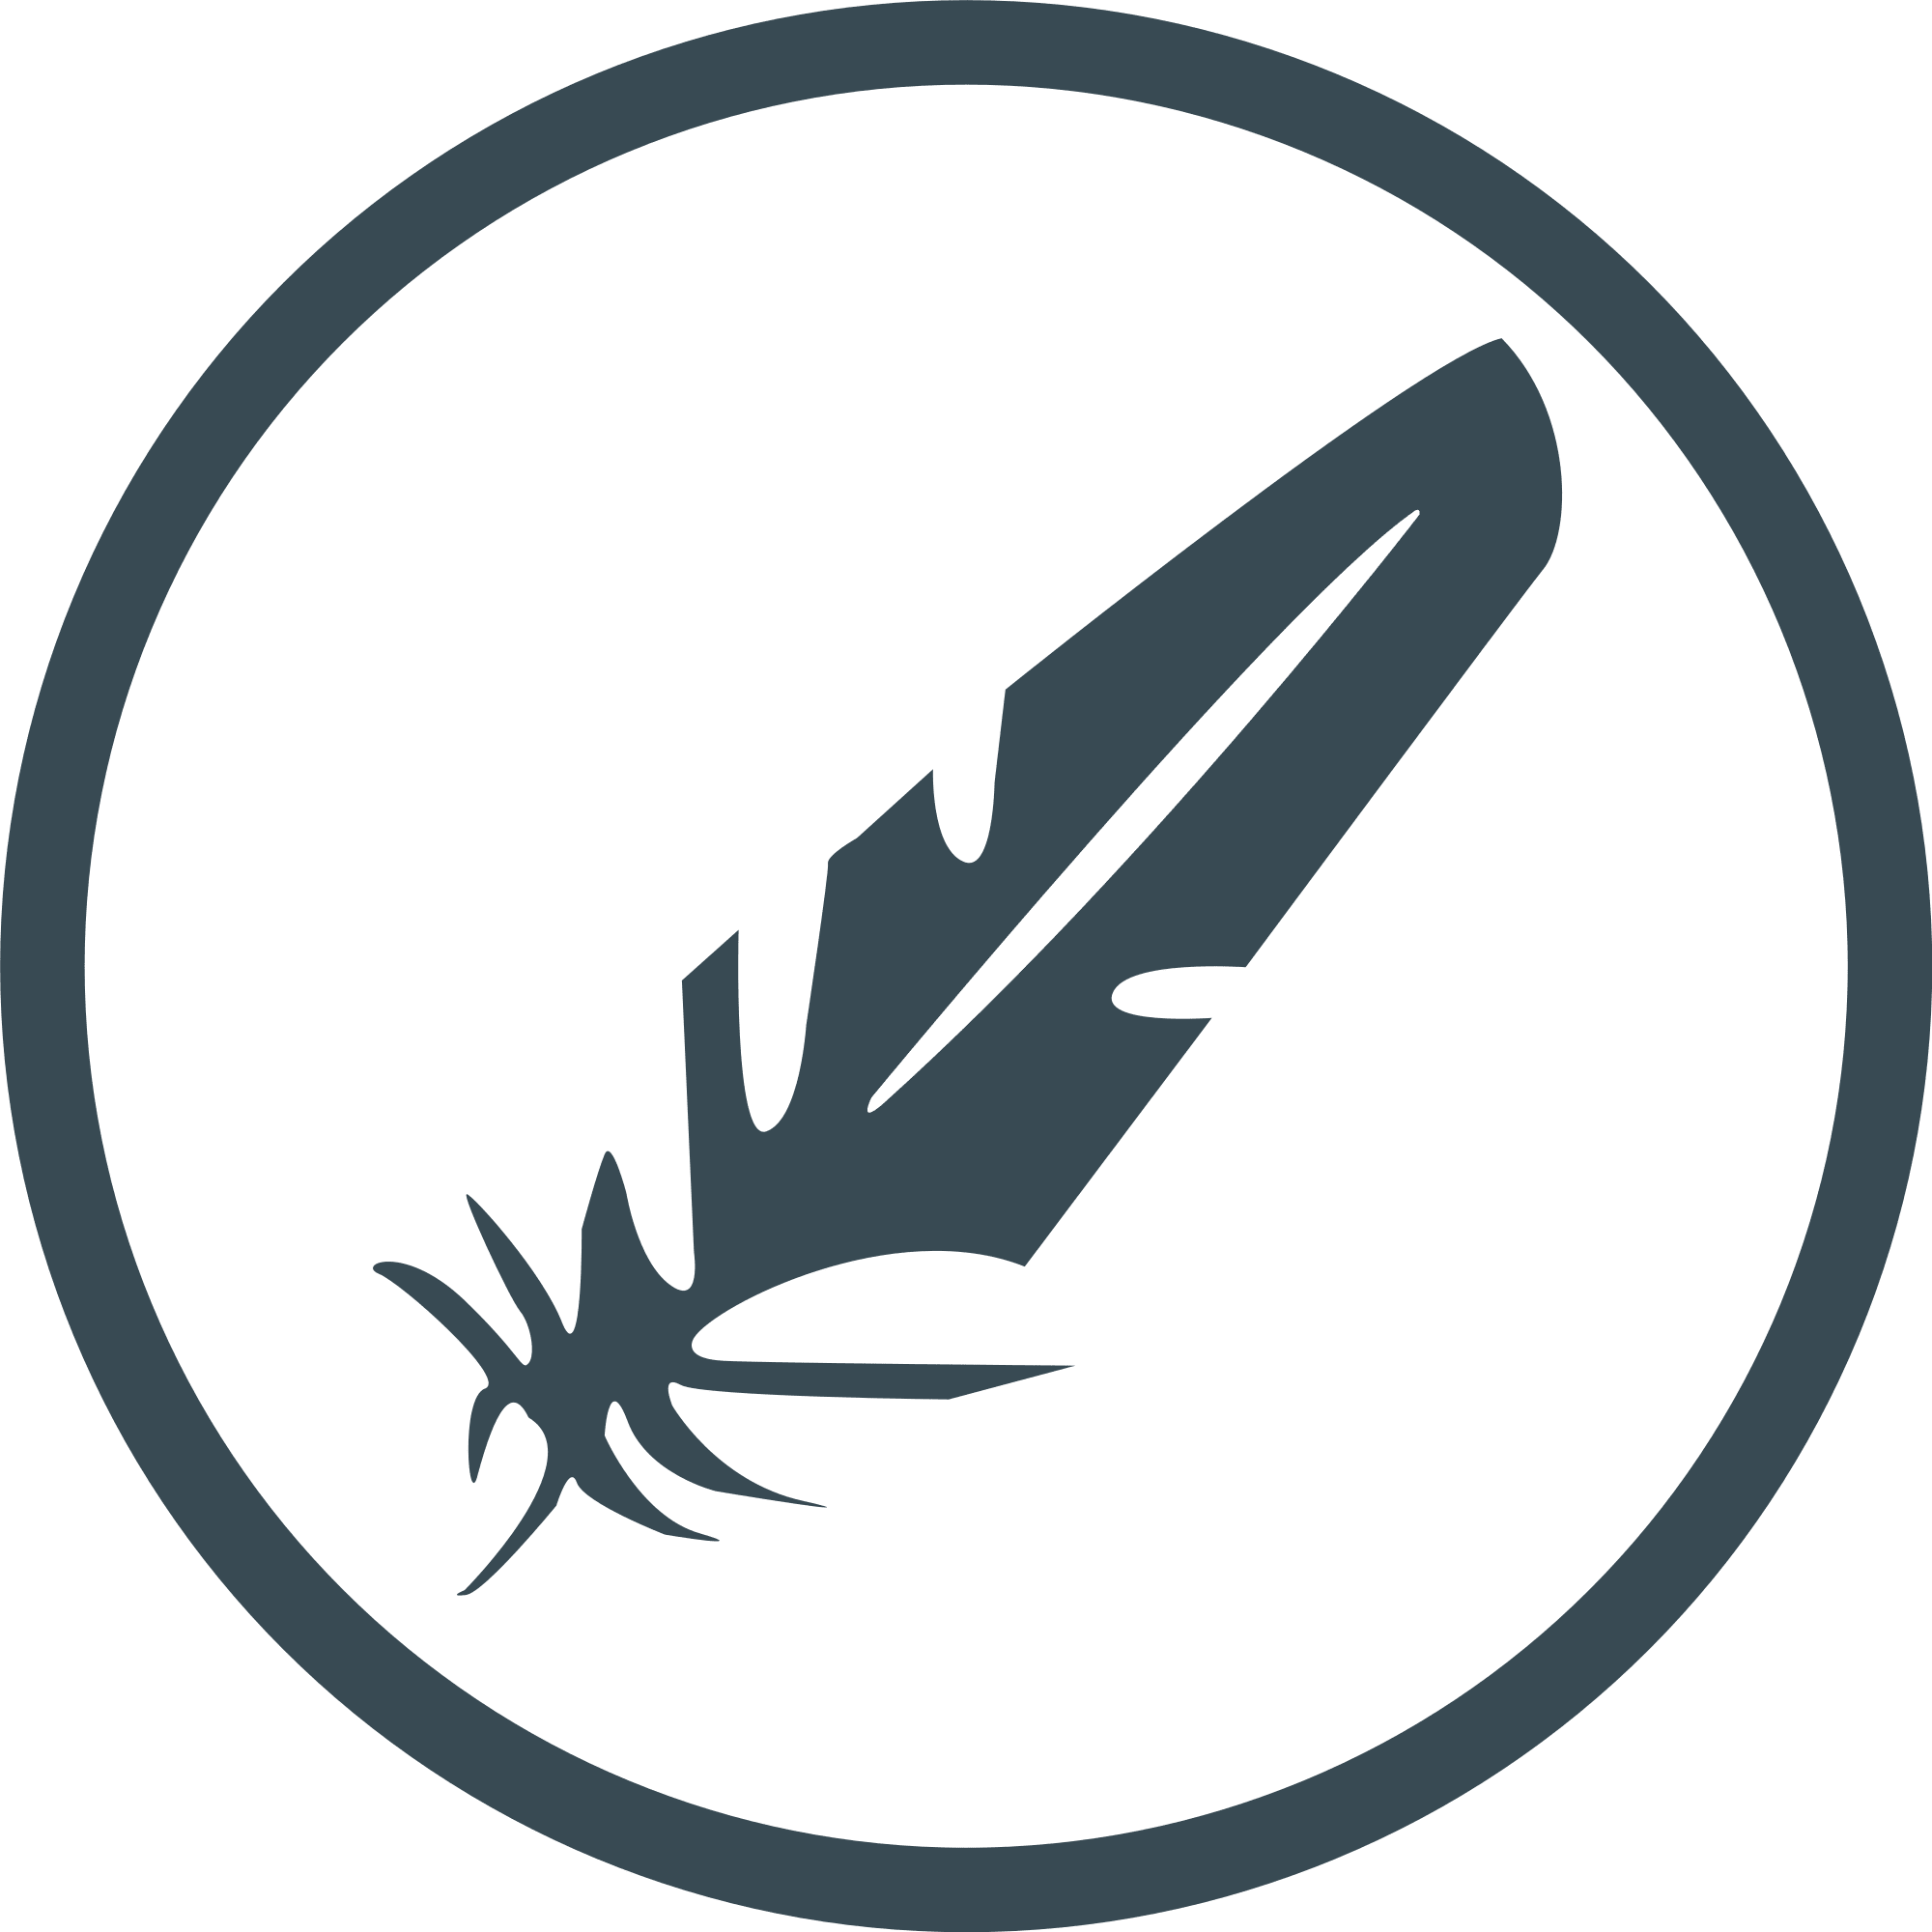 Feathercoin logo in png format